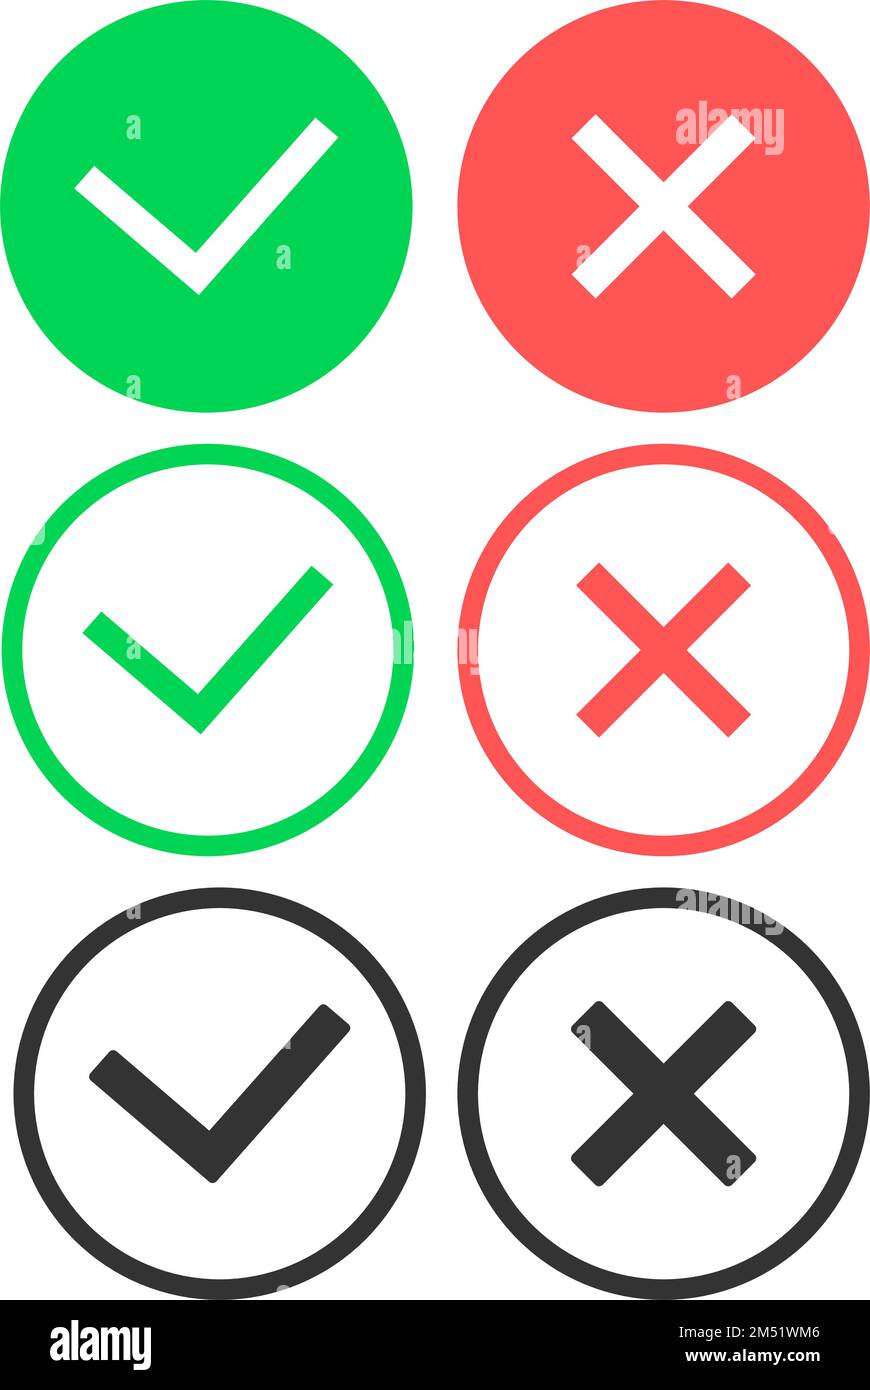 Accept and reject icons. Selection marks. Stock Vector